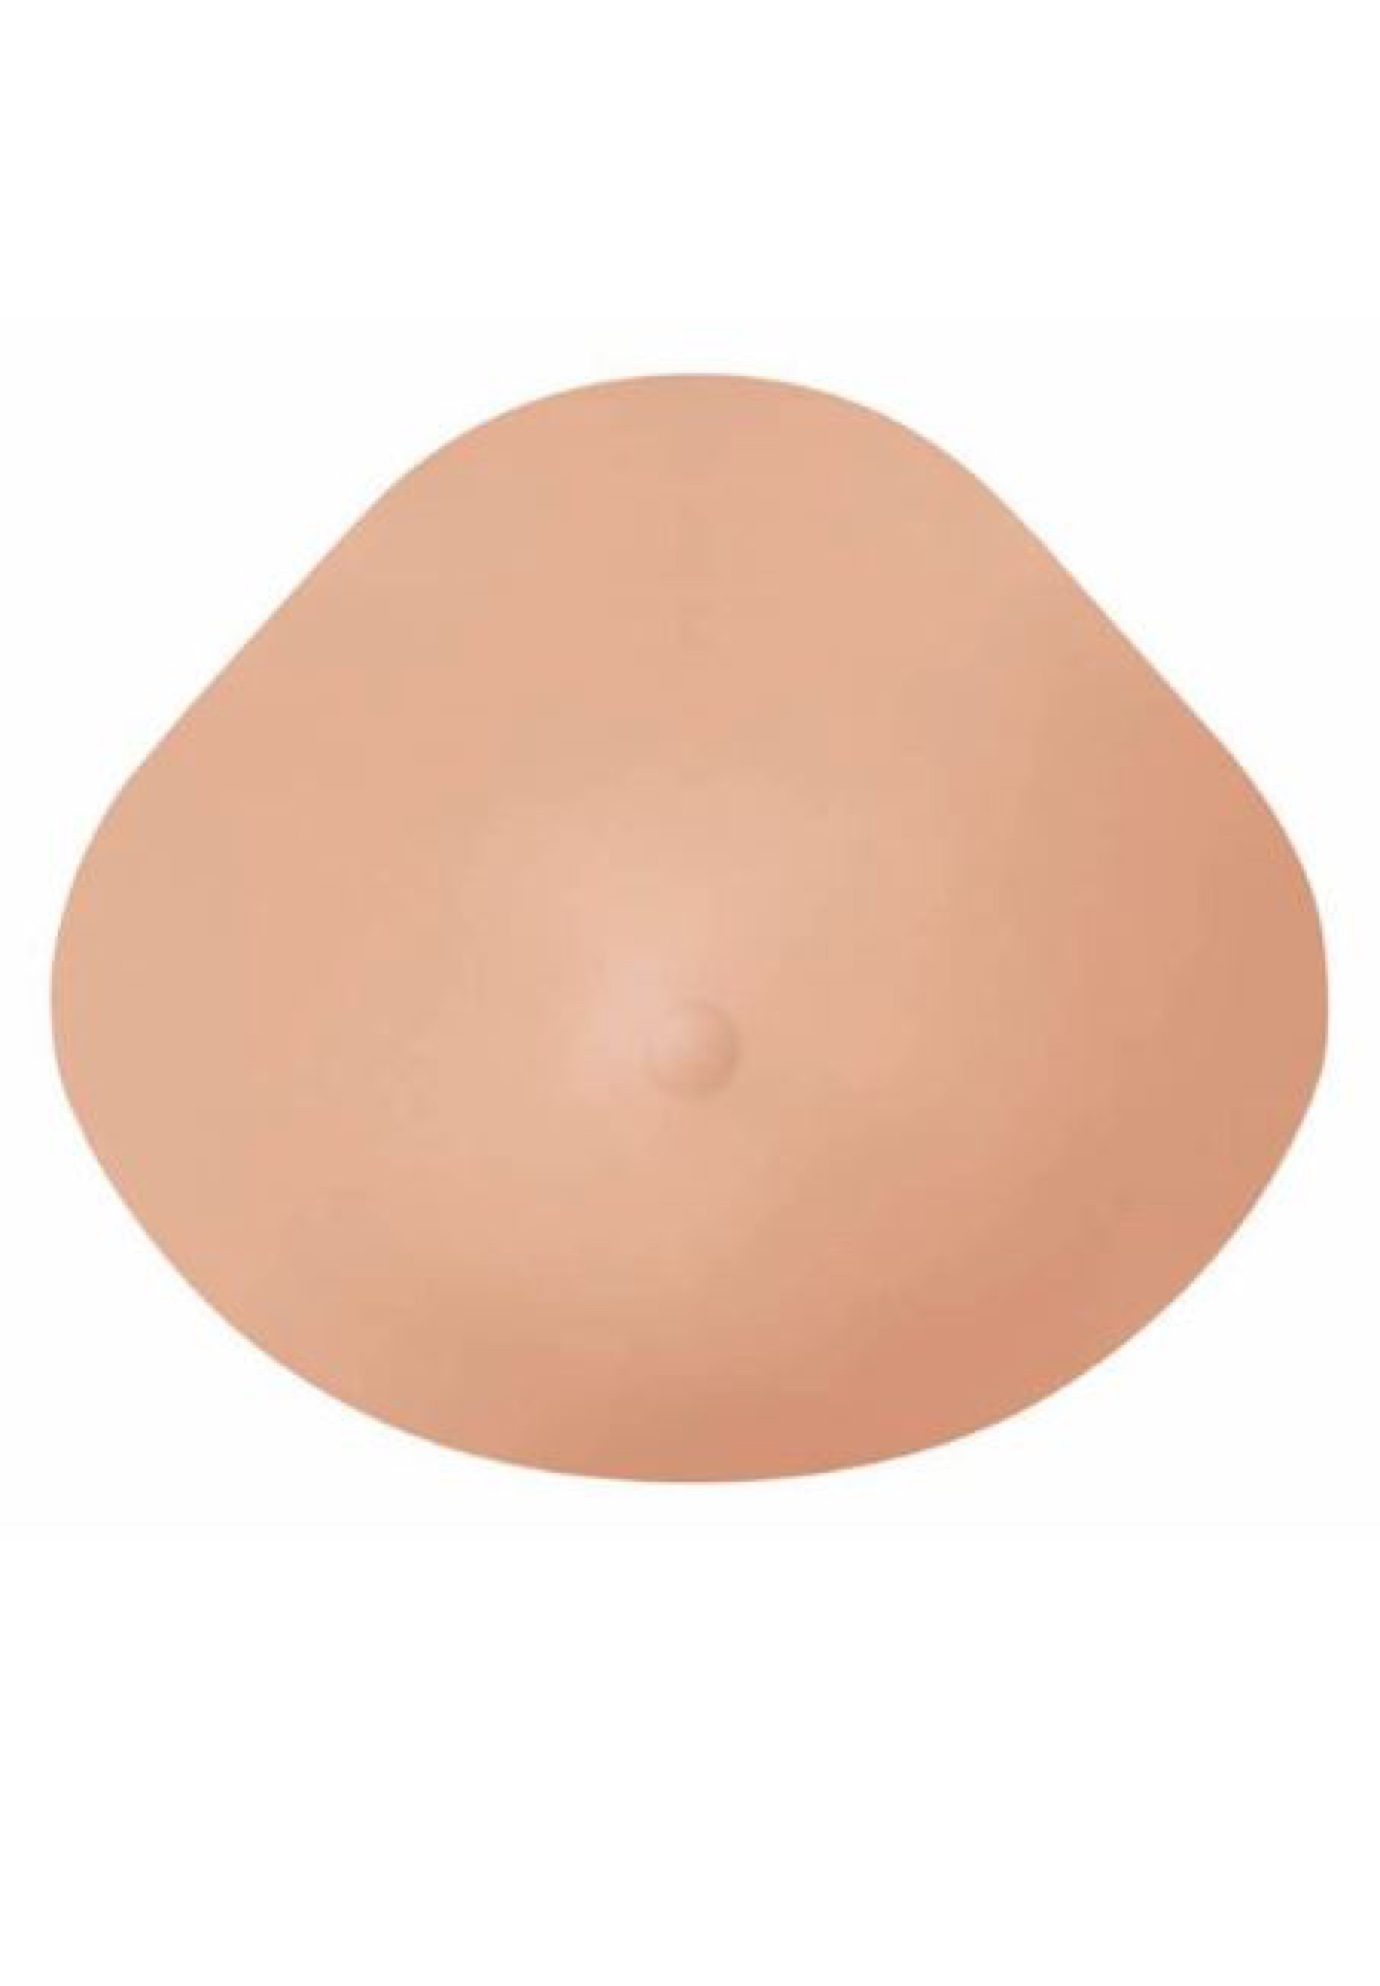 How To Use Breast Forms